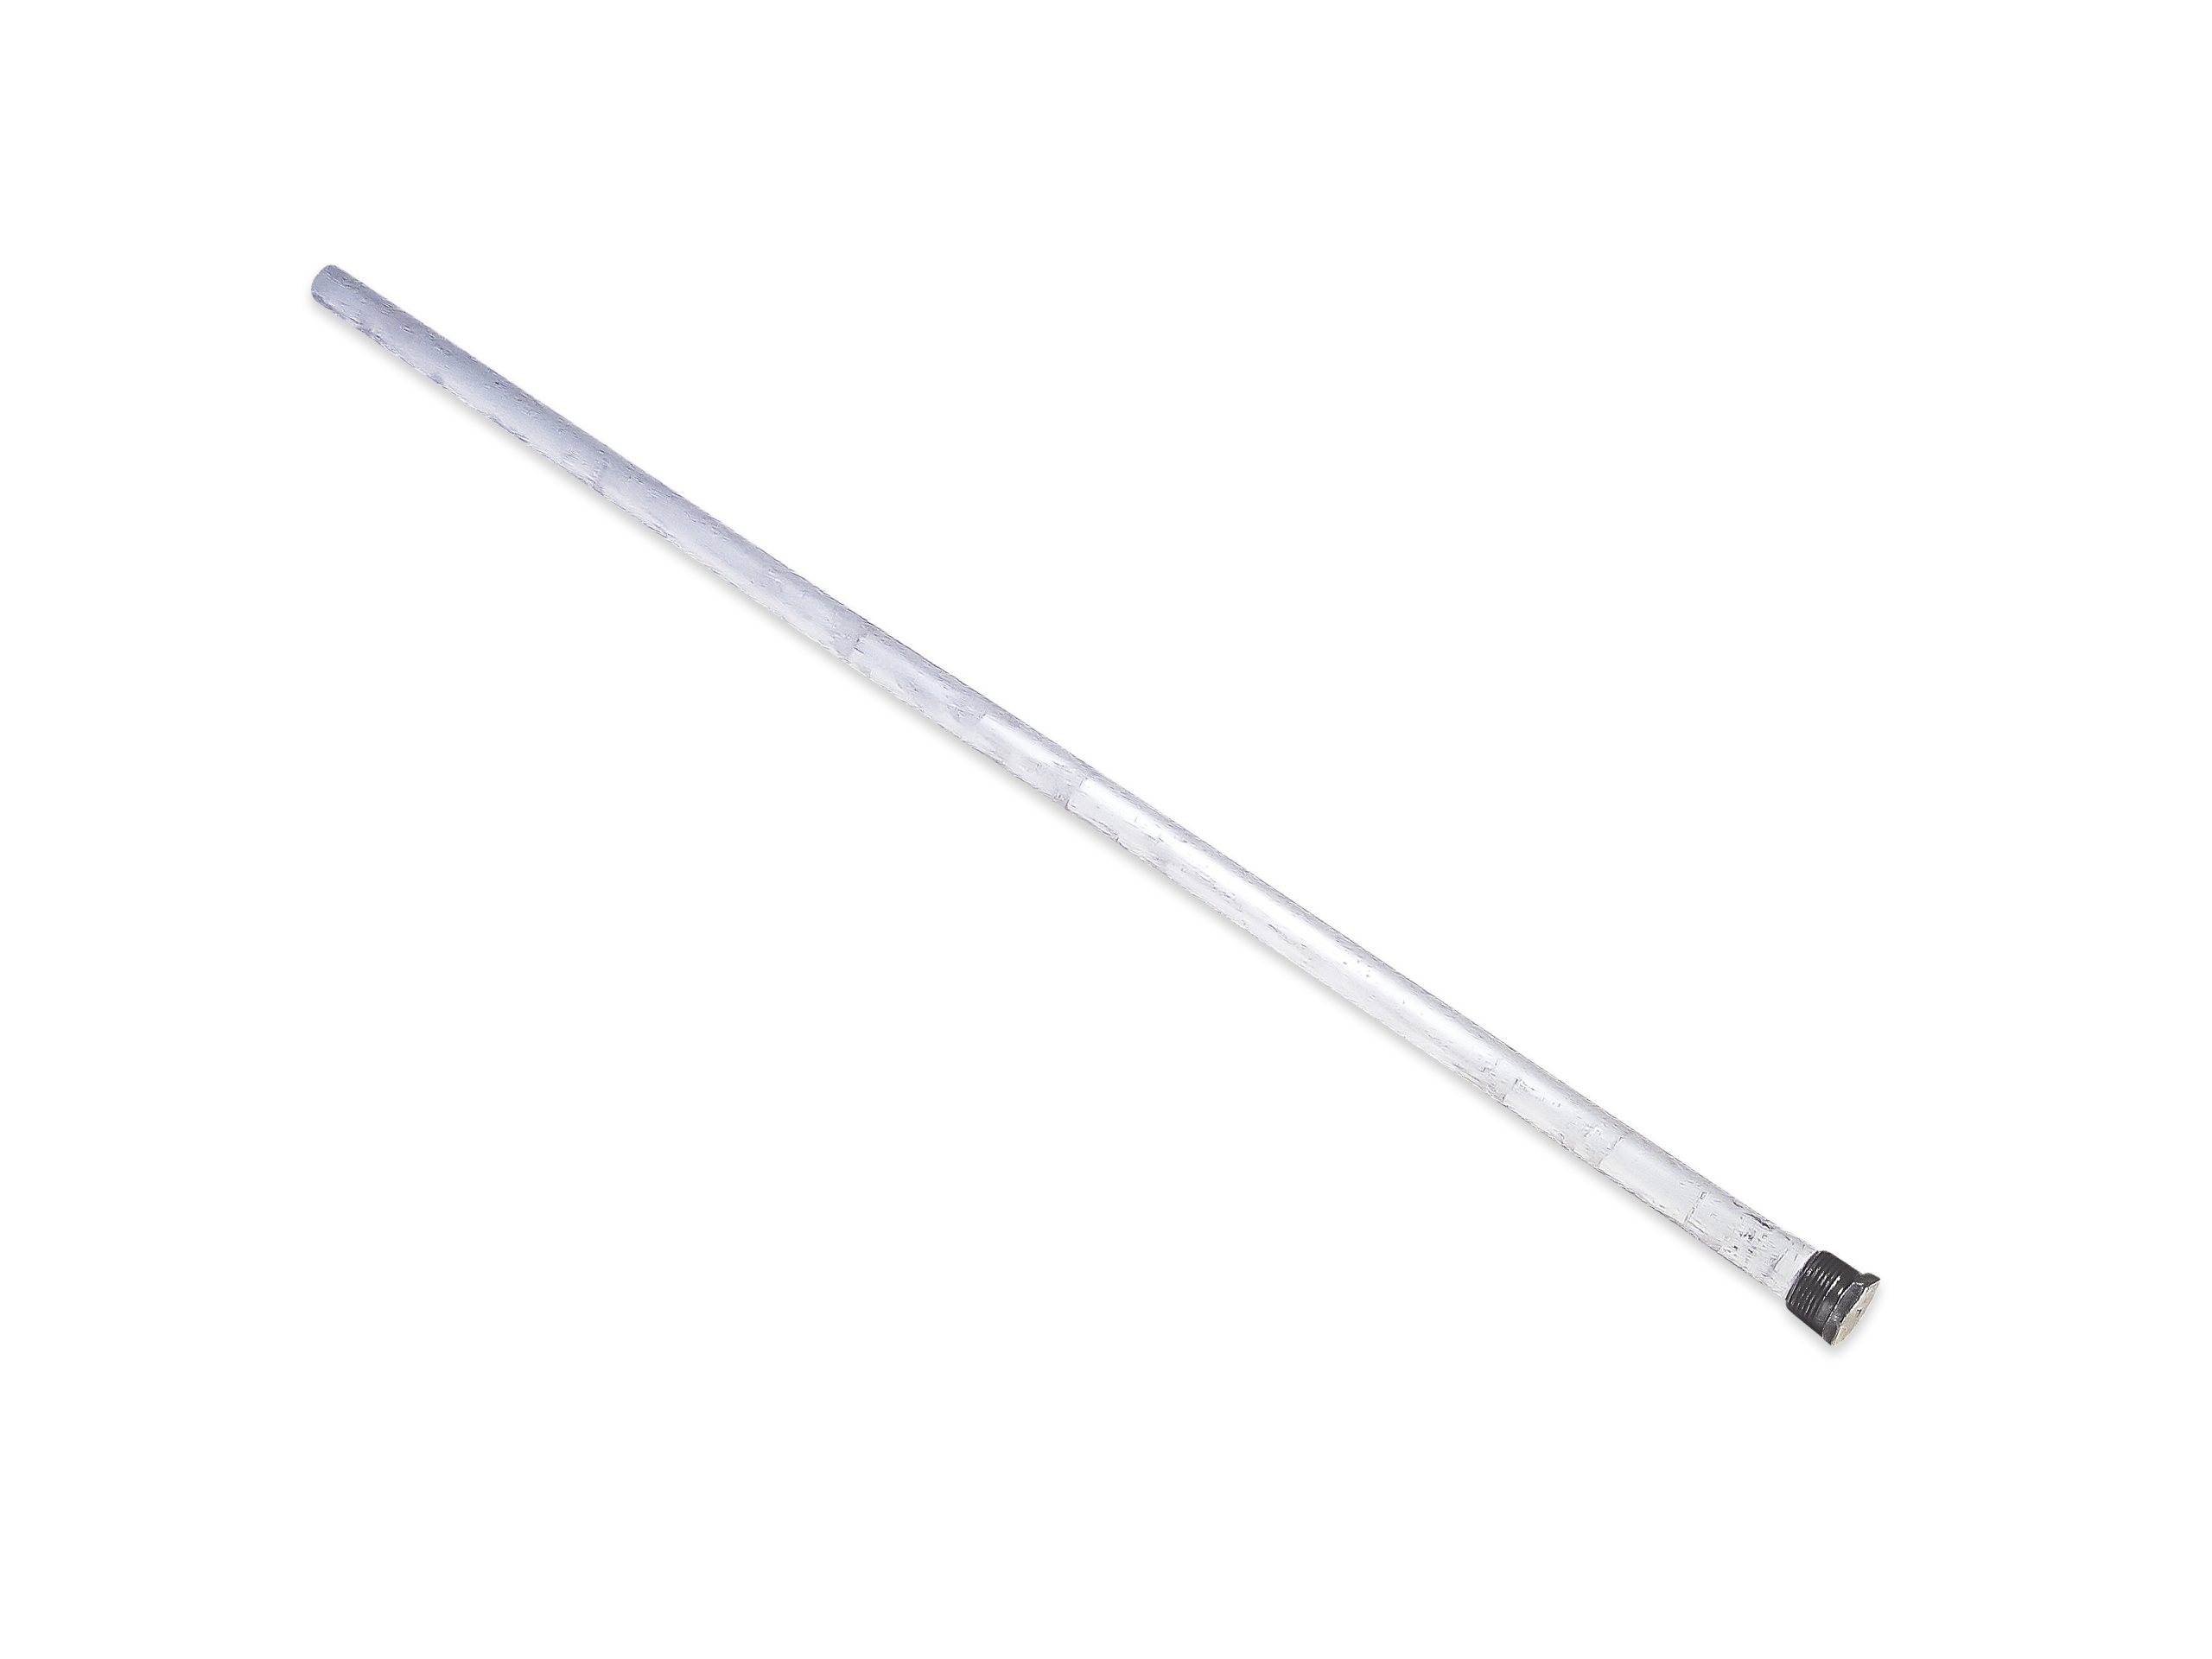 AO SMITH 100109624:K,ANODE,16inch,3/4inchNPT,.75inchDIA,ALUMINUM (replaces 9003944005, 183523-016, 183523-019, 183523-023, 183523-026, 
183523-029, 183523-26, 183523-29, 90018225, 9001835, 9003944, 9003972005, 9003944005)